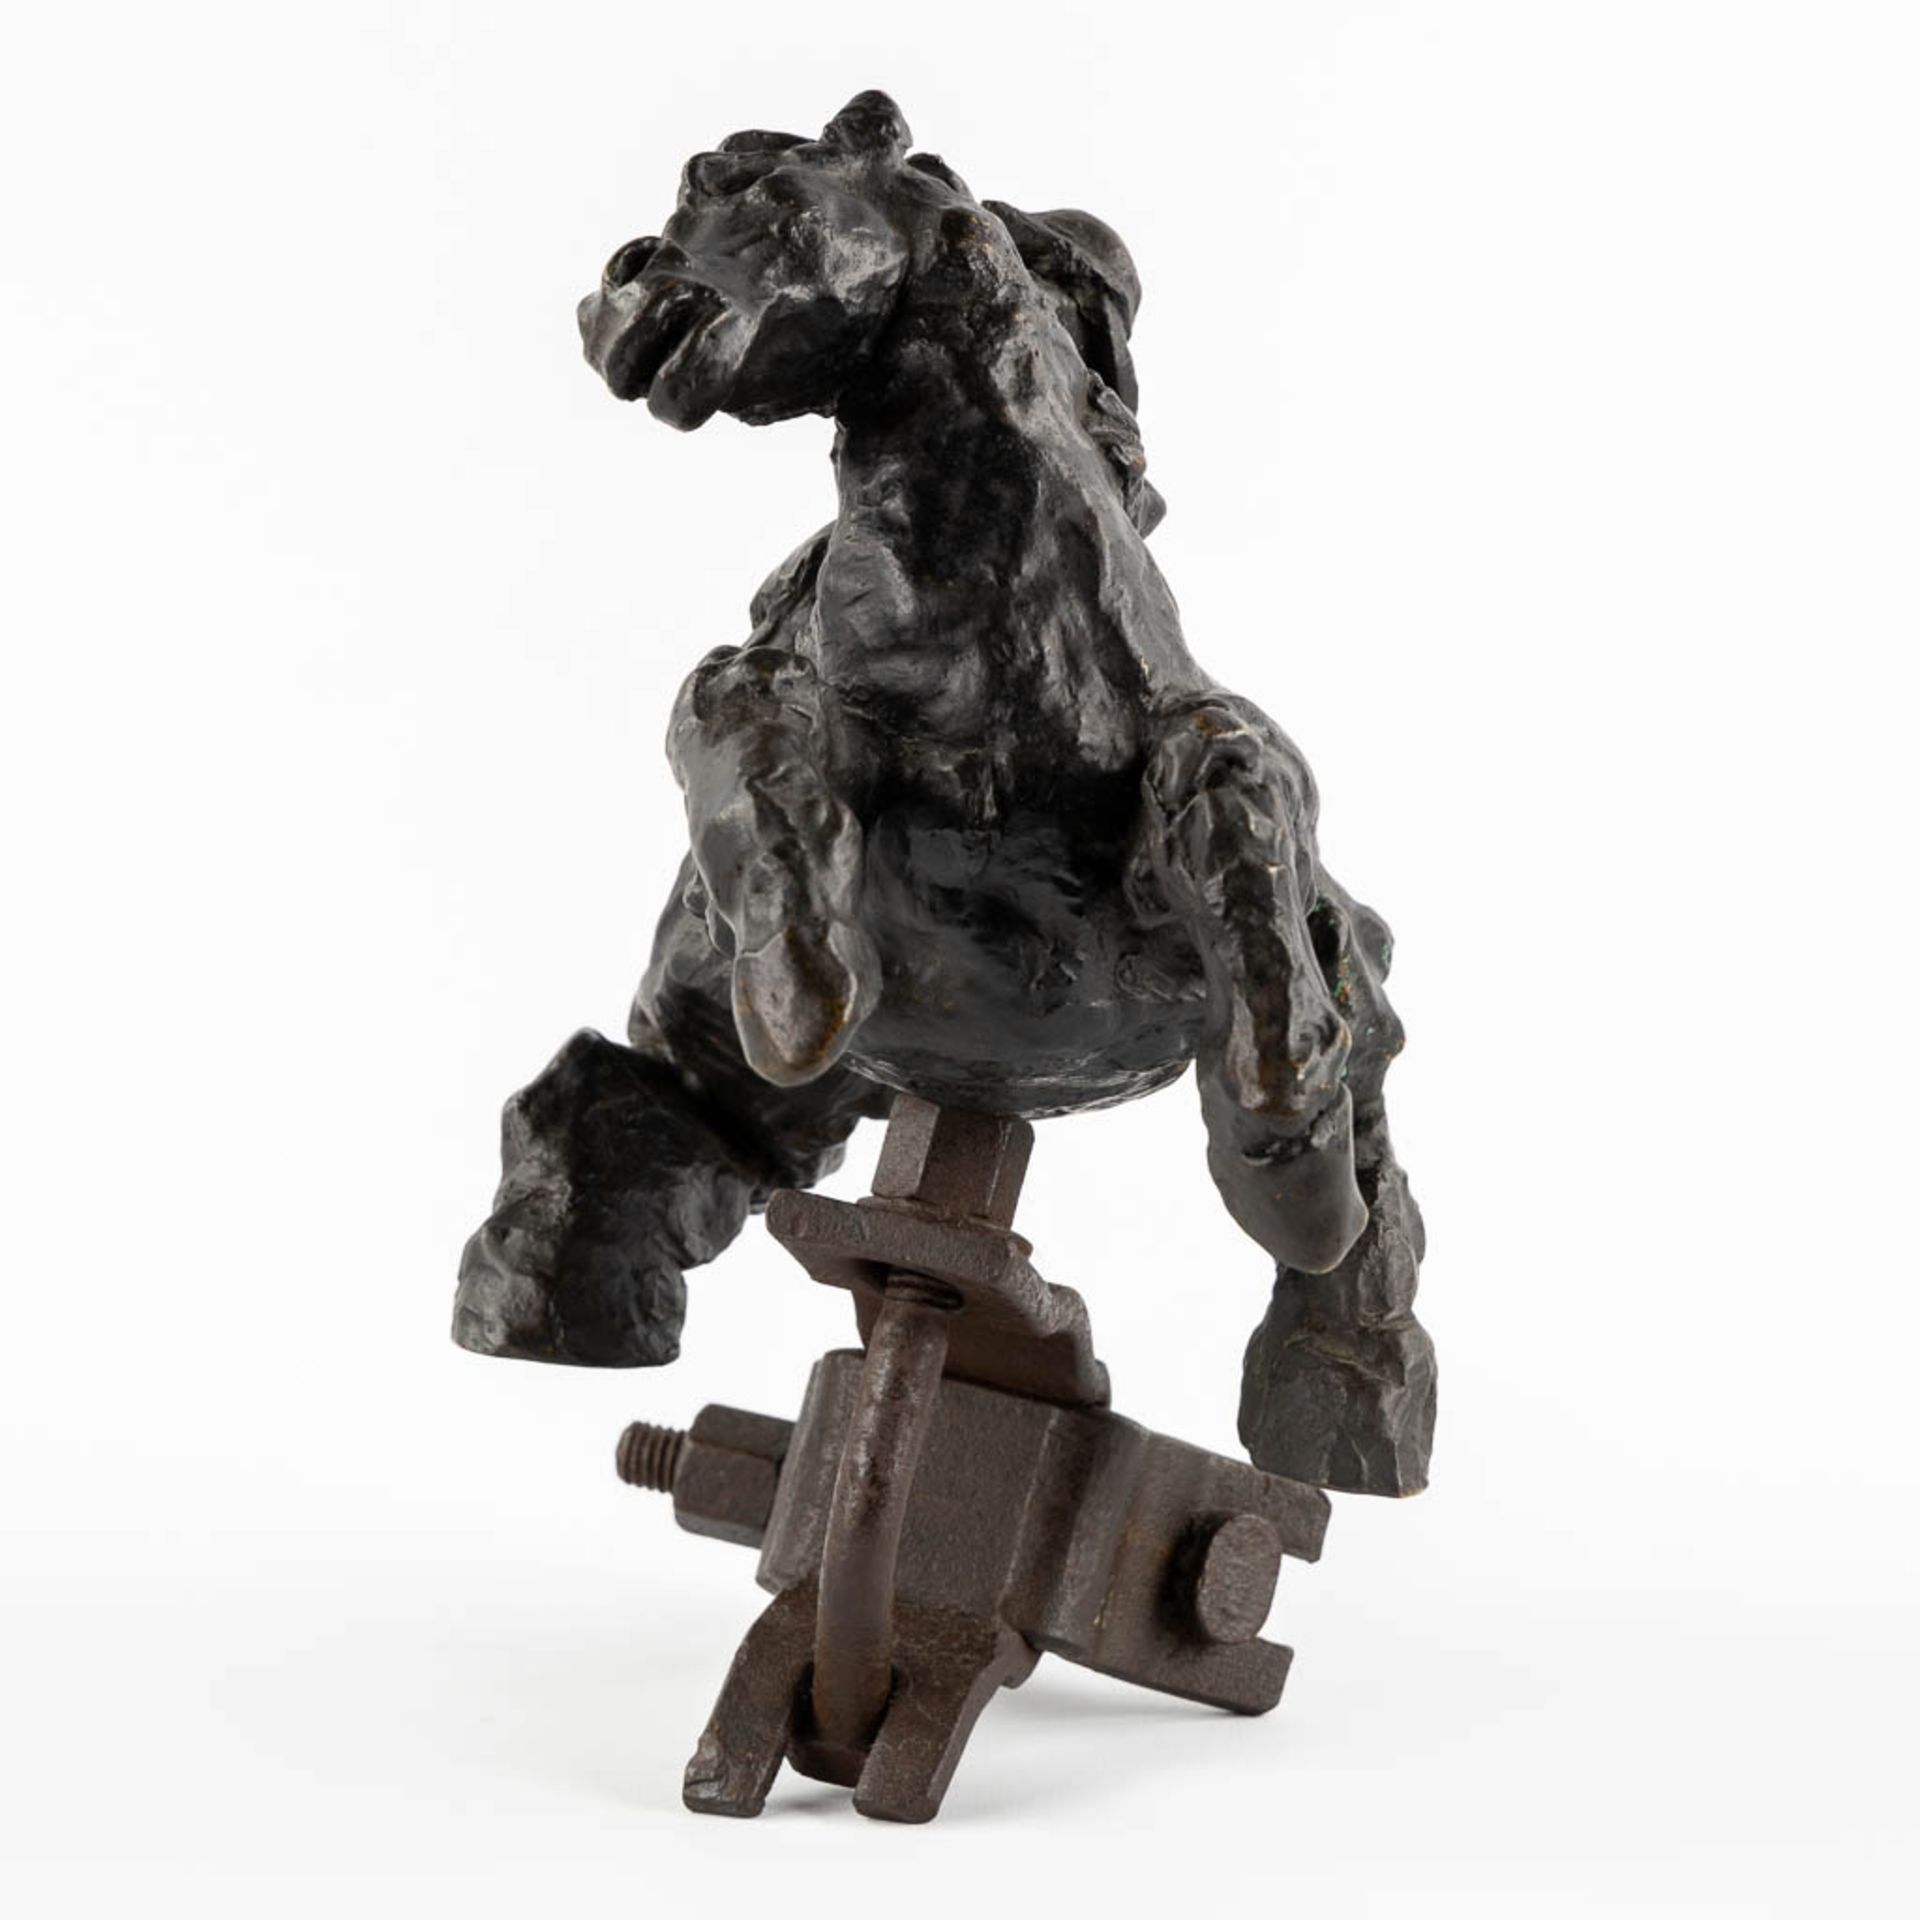 P. LAMBERT (XX) 'Riding a horse' patinated bronze, Ducros Foundry Mark. (L:15 x W:27 x H:28 cm) - Image 6 of 11